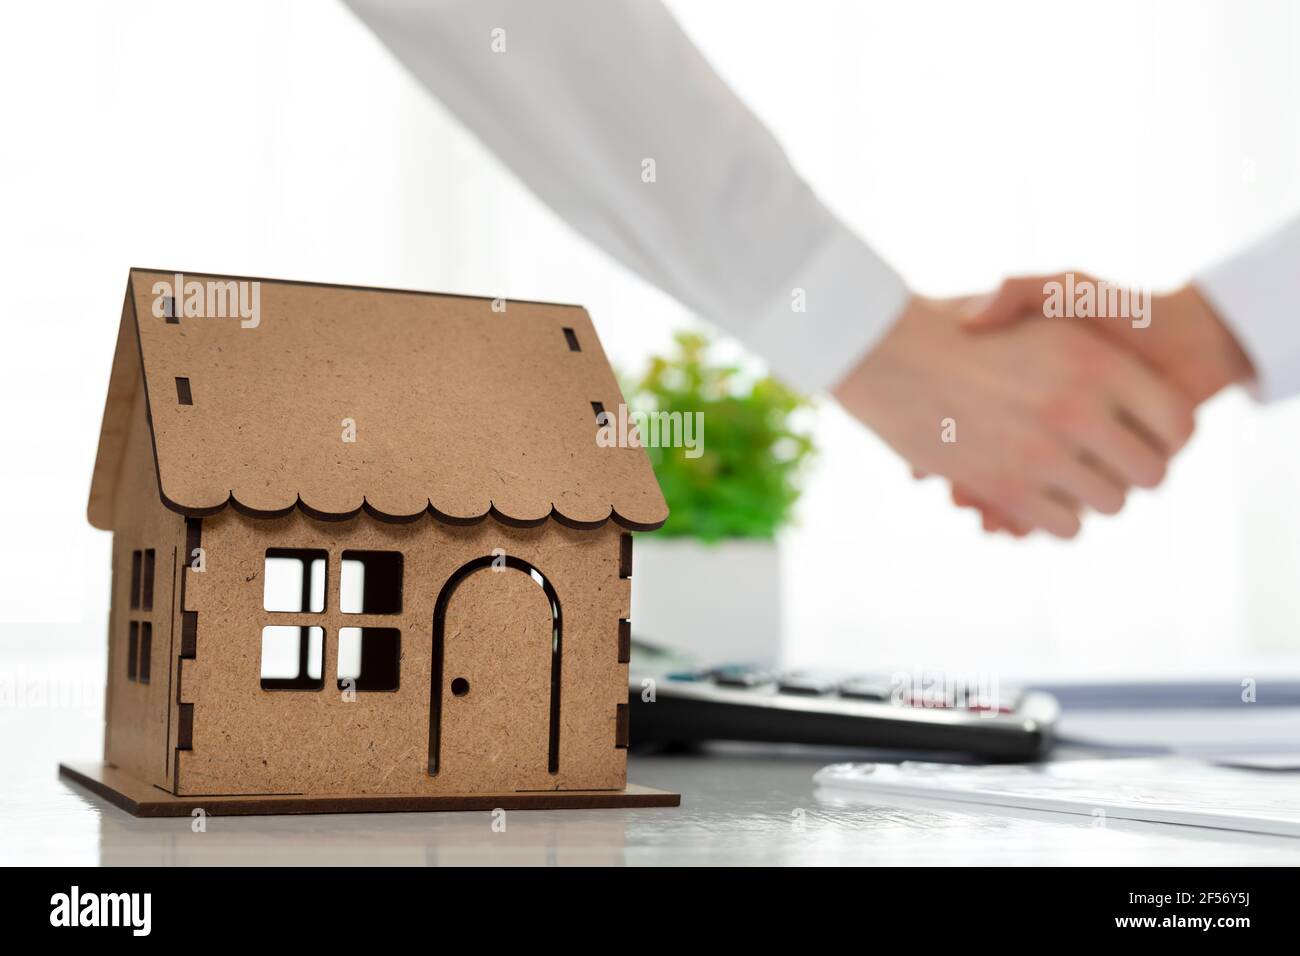 Handshake after an agreement to buy or rent a house. Stock Photo